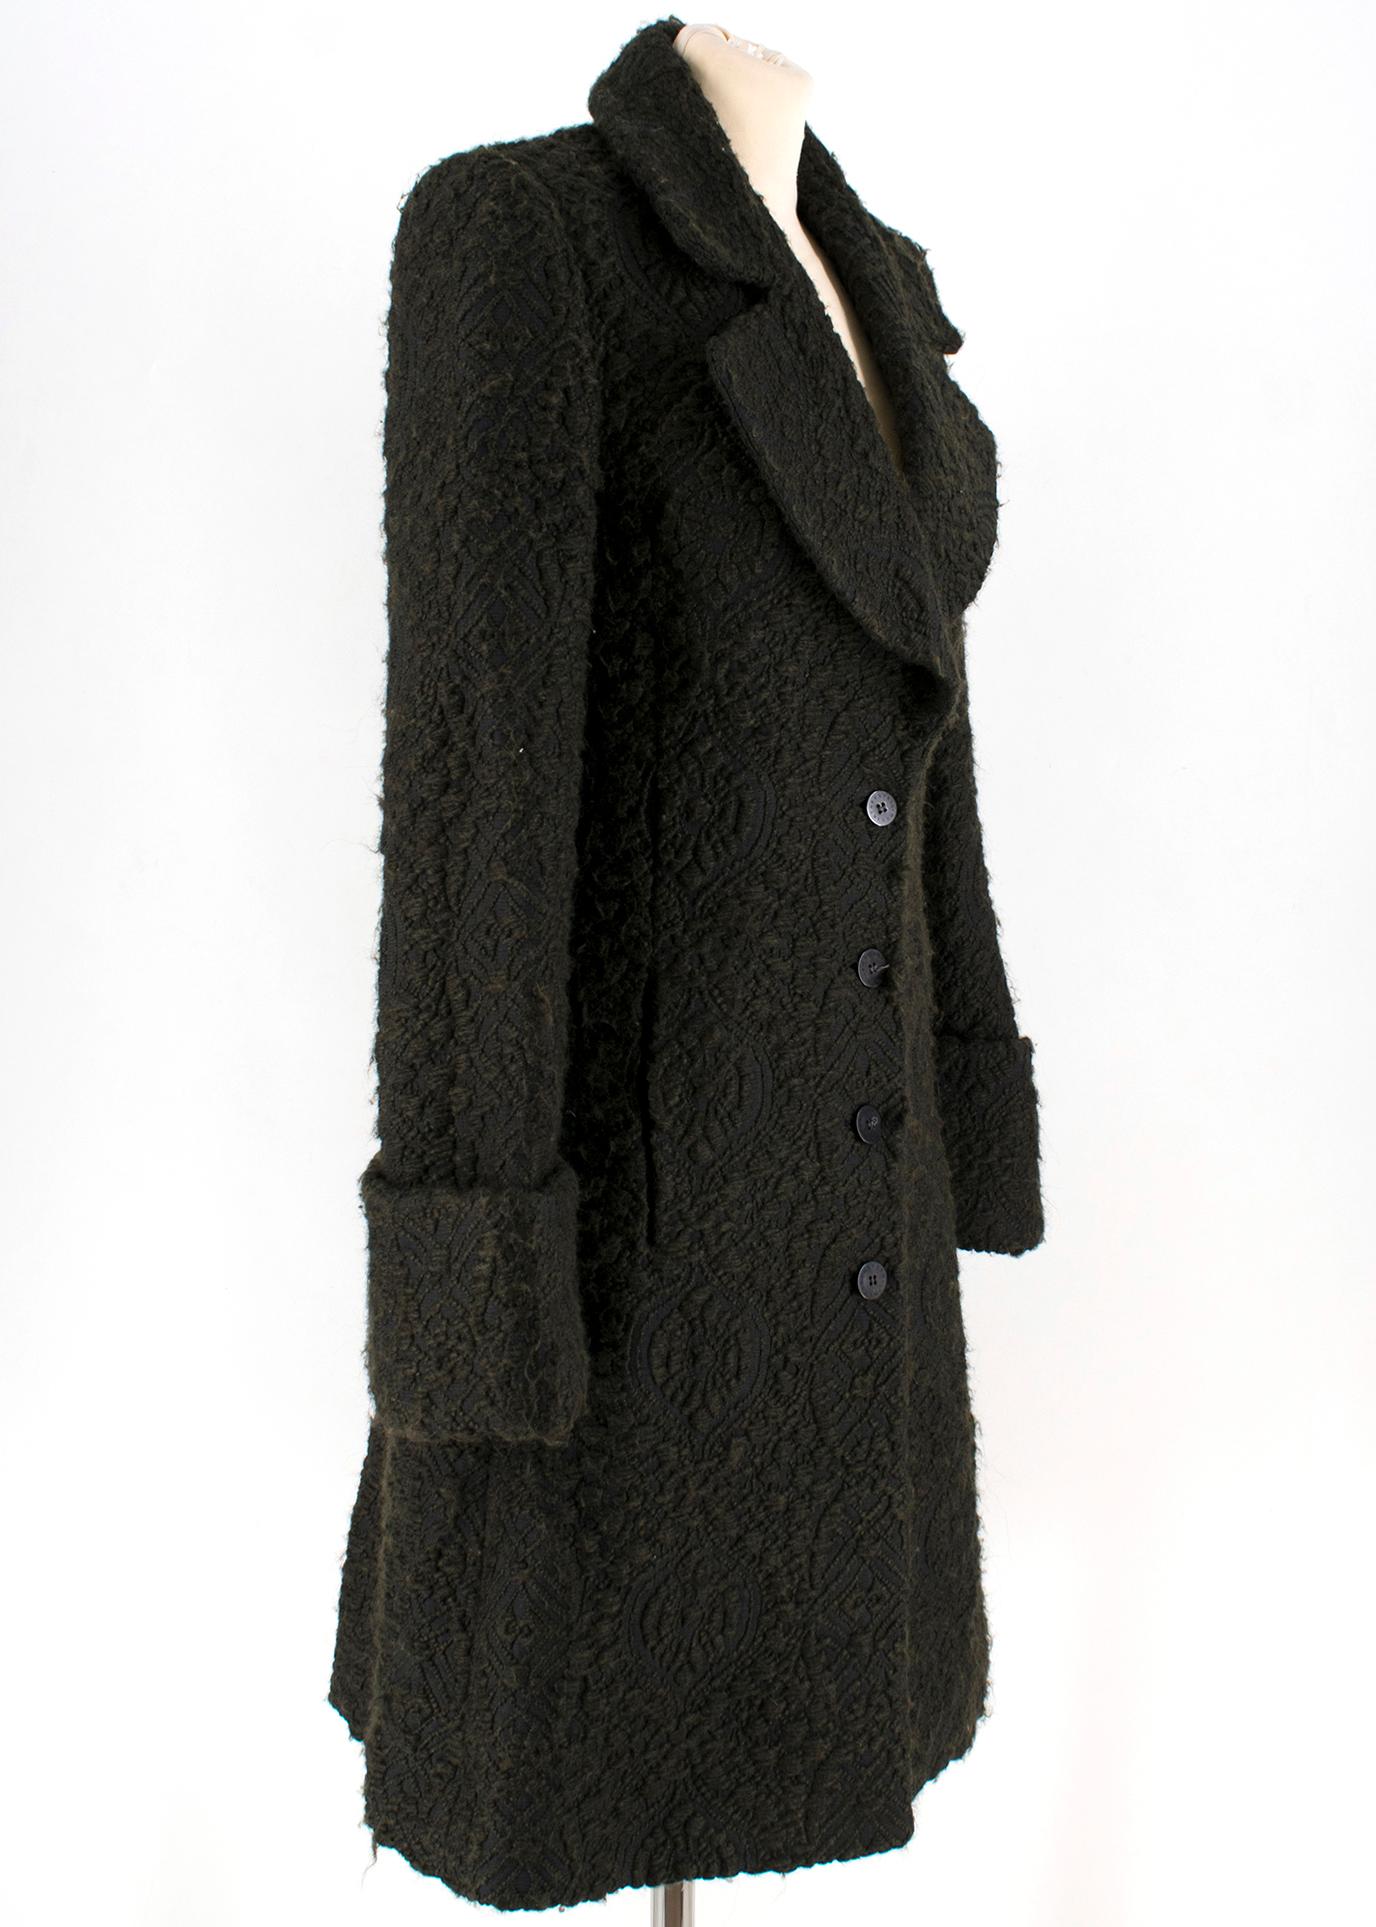 Stella McCartney Green Cloque Wool Coat

-Dark-green, heavyweight Cloque textured wool
-Notch lapels, long sleeves, turn-up cuffs
-Single breasted button closure
-Unlined, matching binding

Please note, these items are pre-owned and may show some